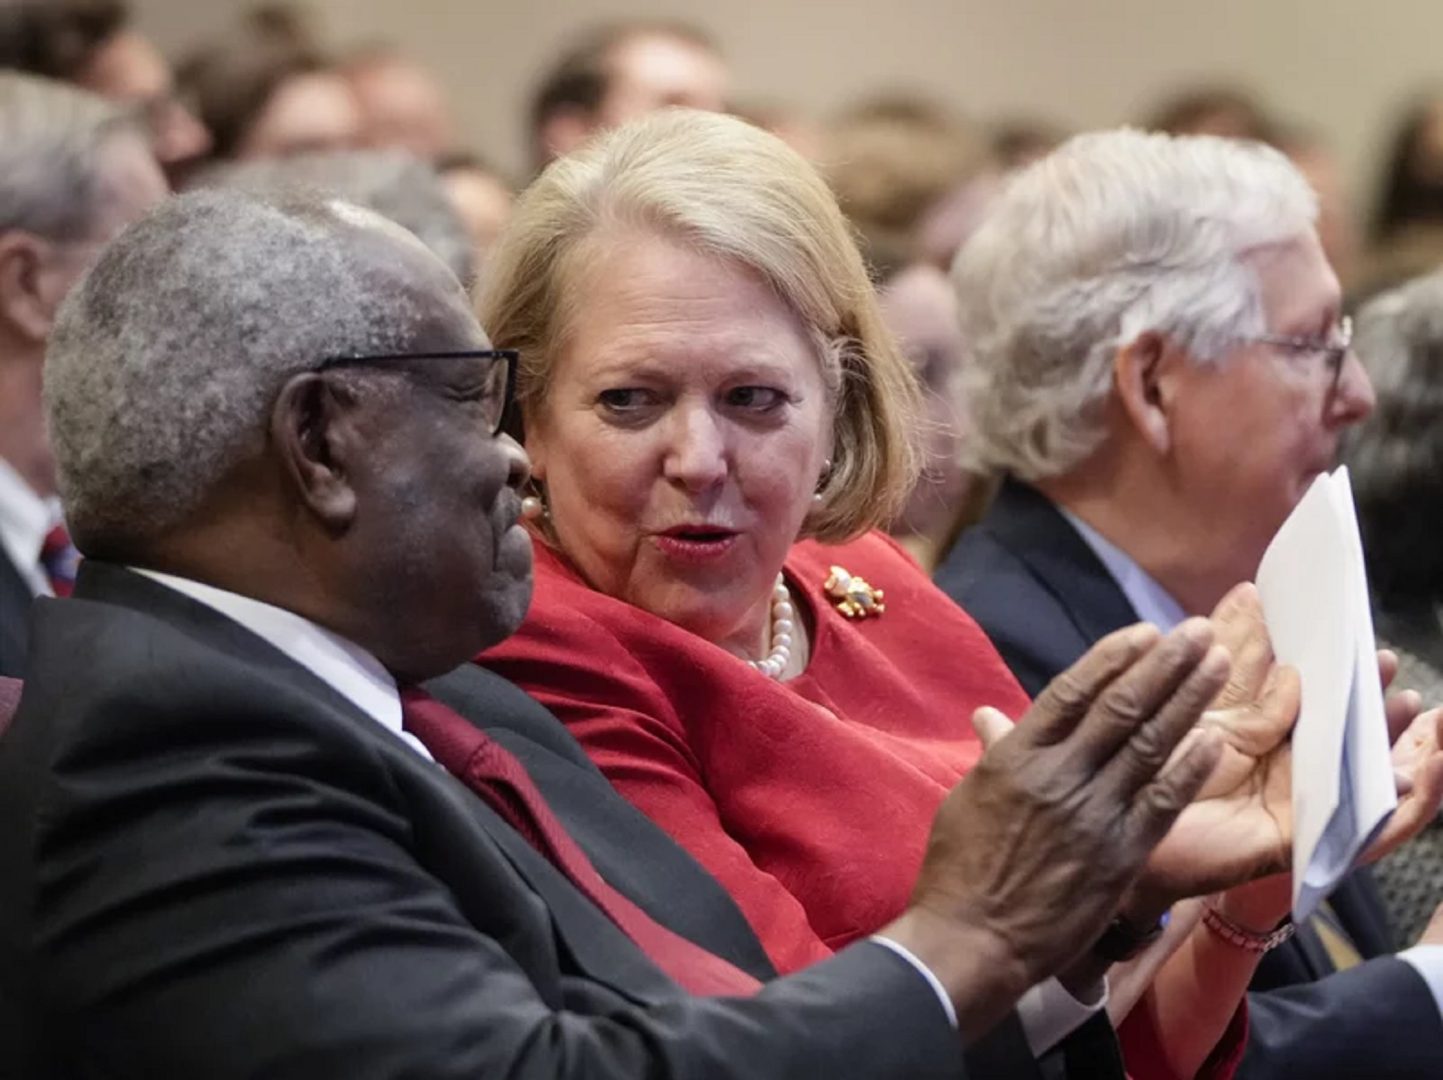 Supreme Court Justice Clarence Thomas talks to his wife, Ginny Thomas, a conservative activist, at the Heritage Foundation on Oct. 21, 2021, in Washington, D.C.